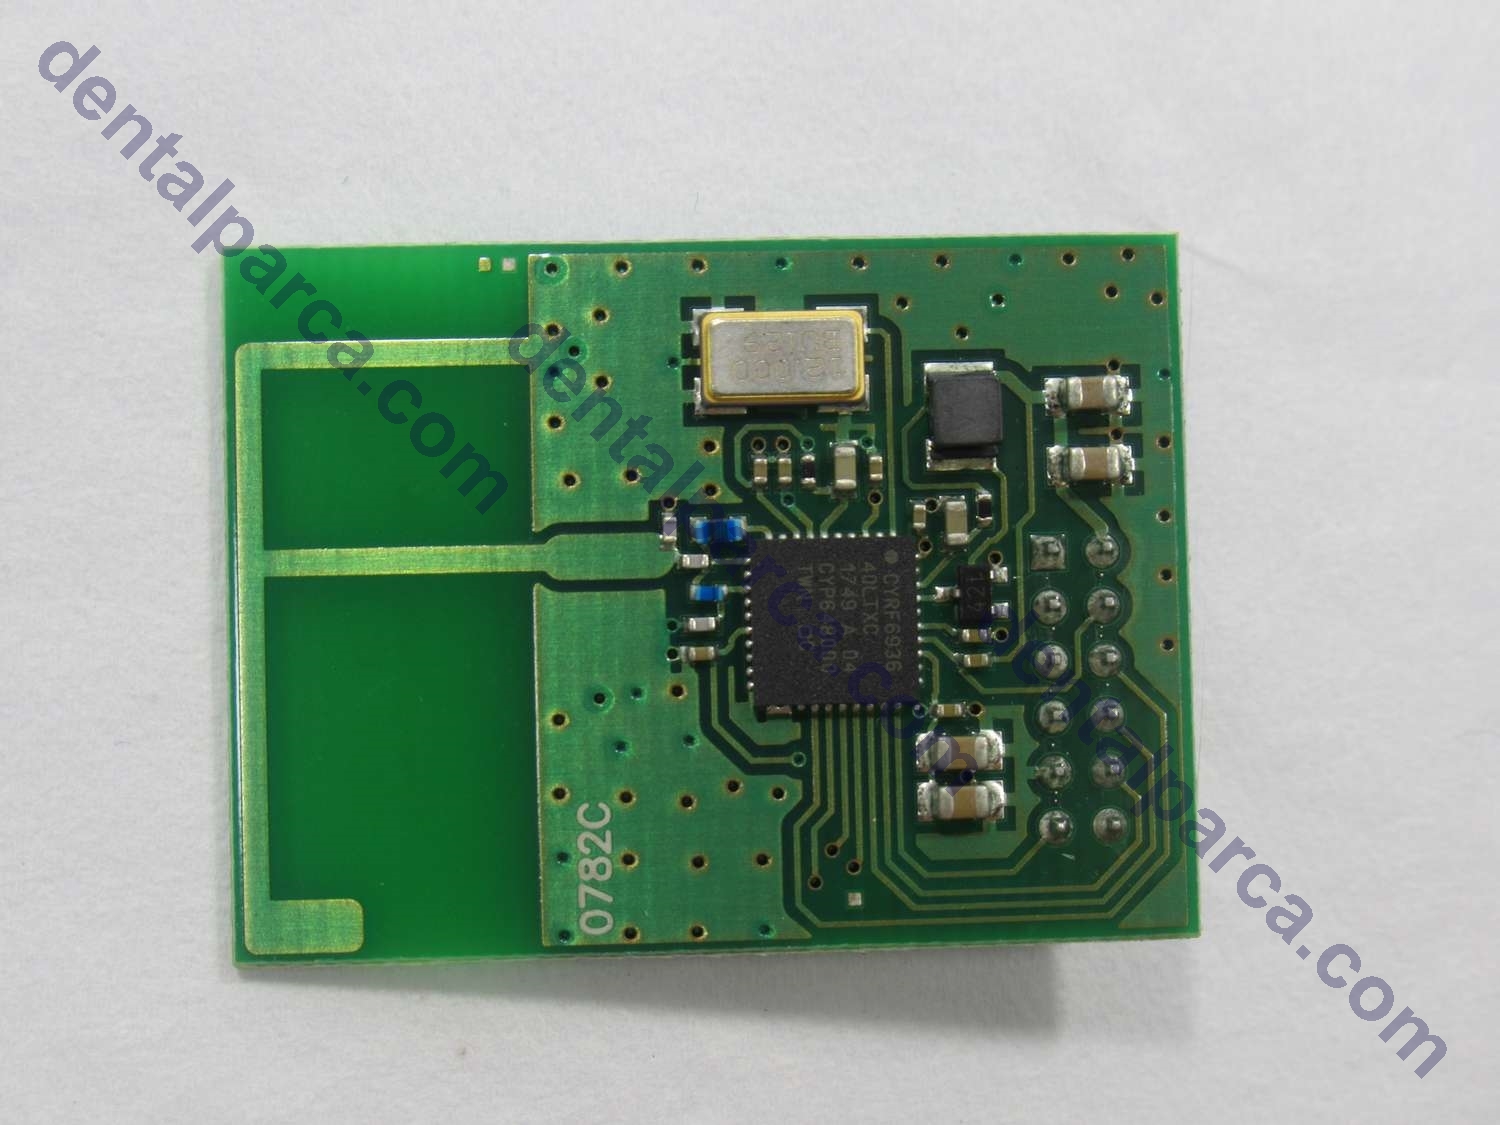 DR SMİLE RADIO DEVICE BOARD (FOOTSWITCH) resmi